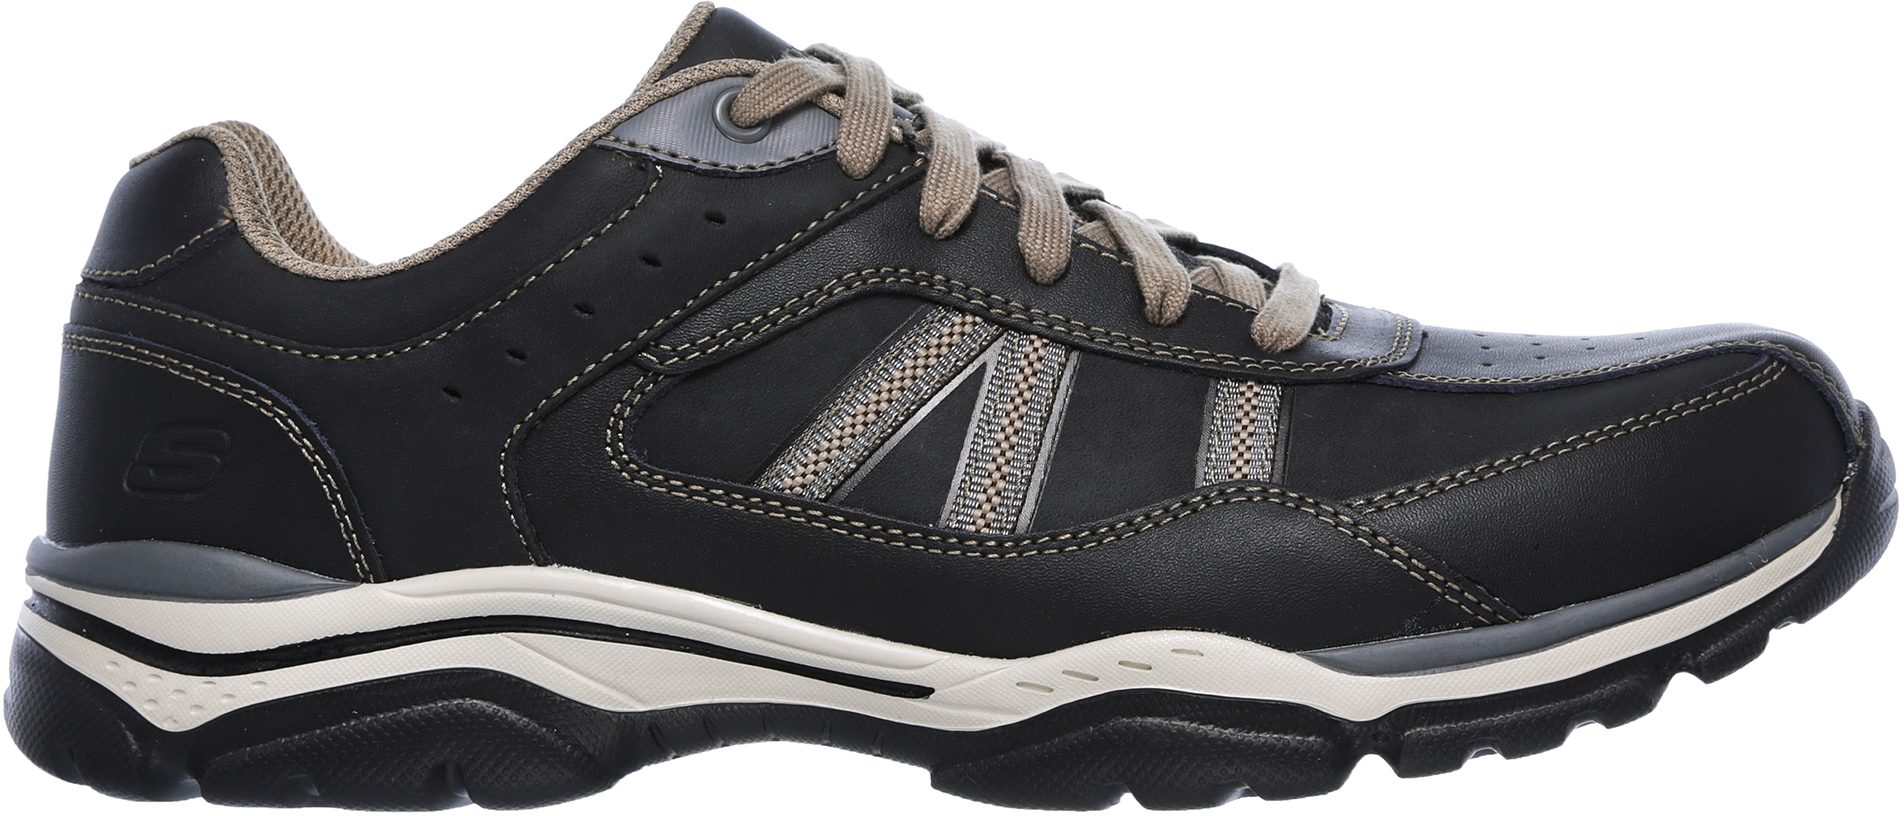 Skechers Relaxed Fit: Rovato - Texon Black / Taupe 65418 BKTP ...